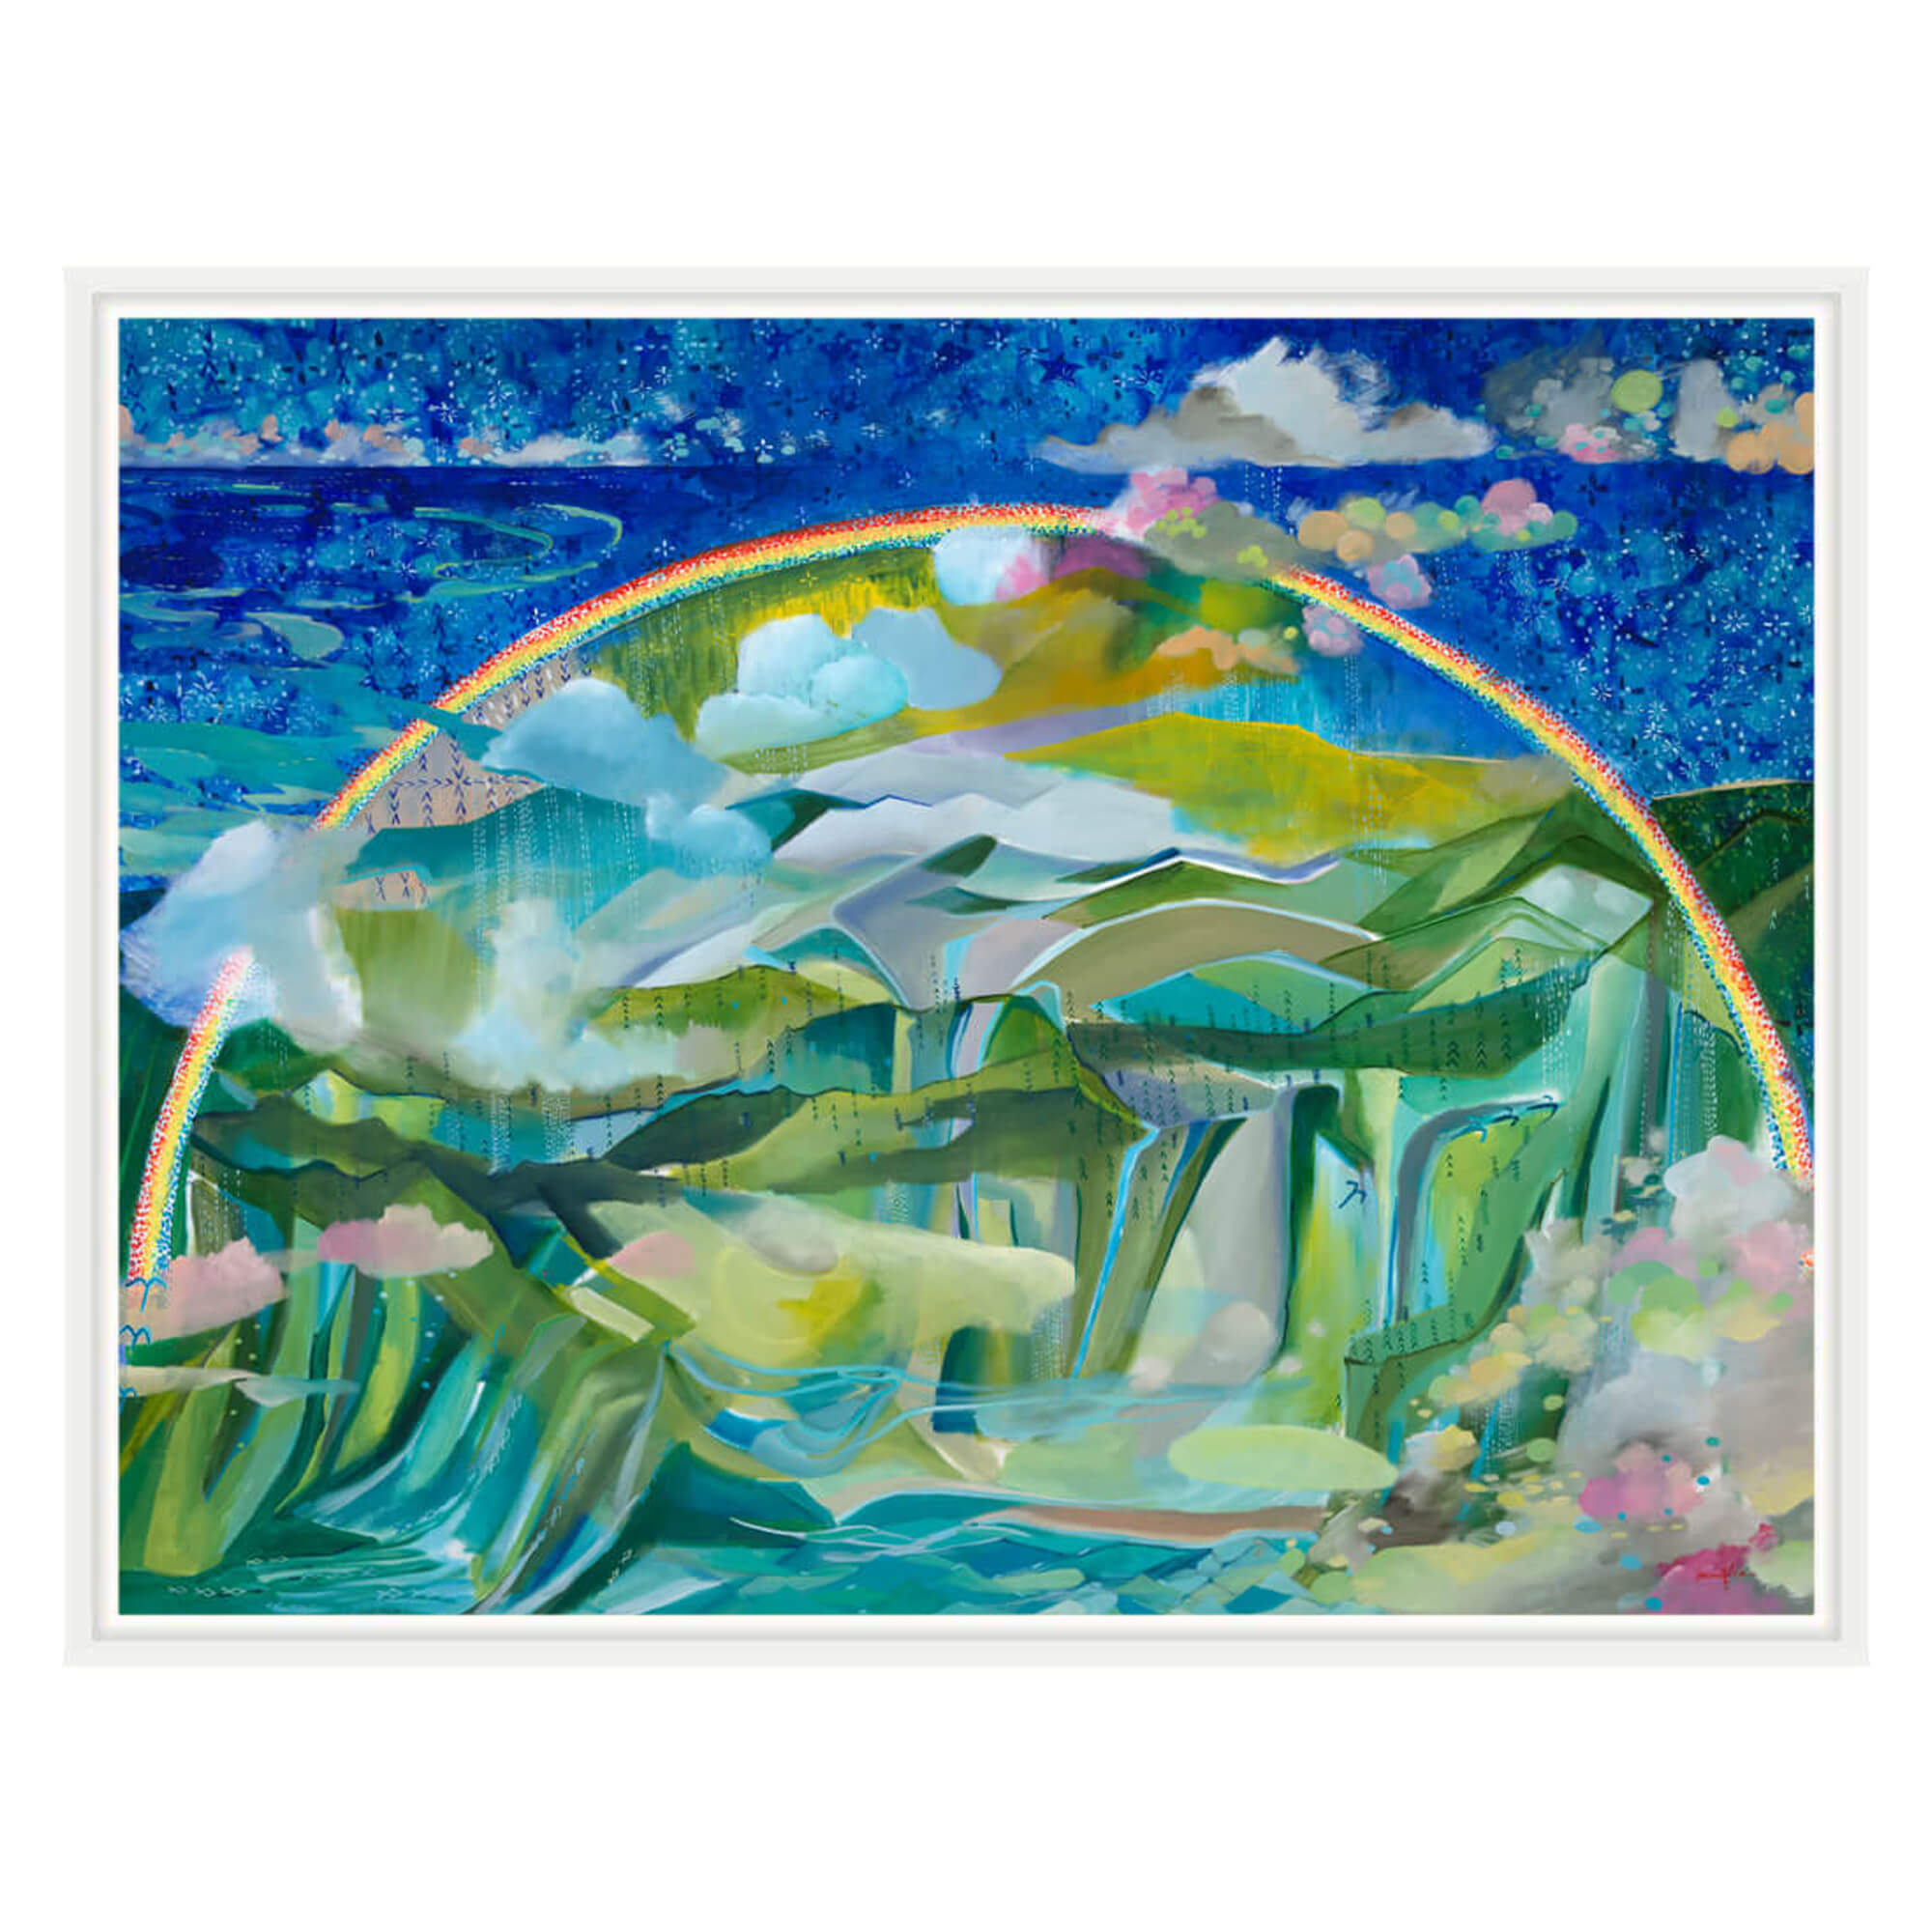 Framed canvas art print of an abstract landscape with a rainbow over the mountains by Hawaii artist Saumolia Puapuaga